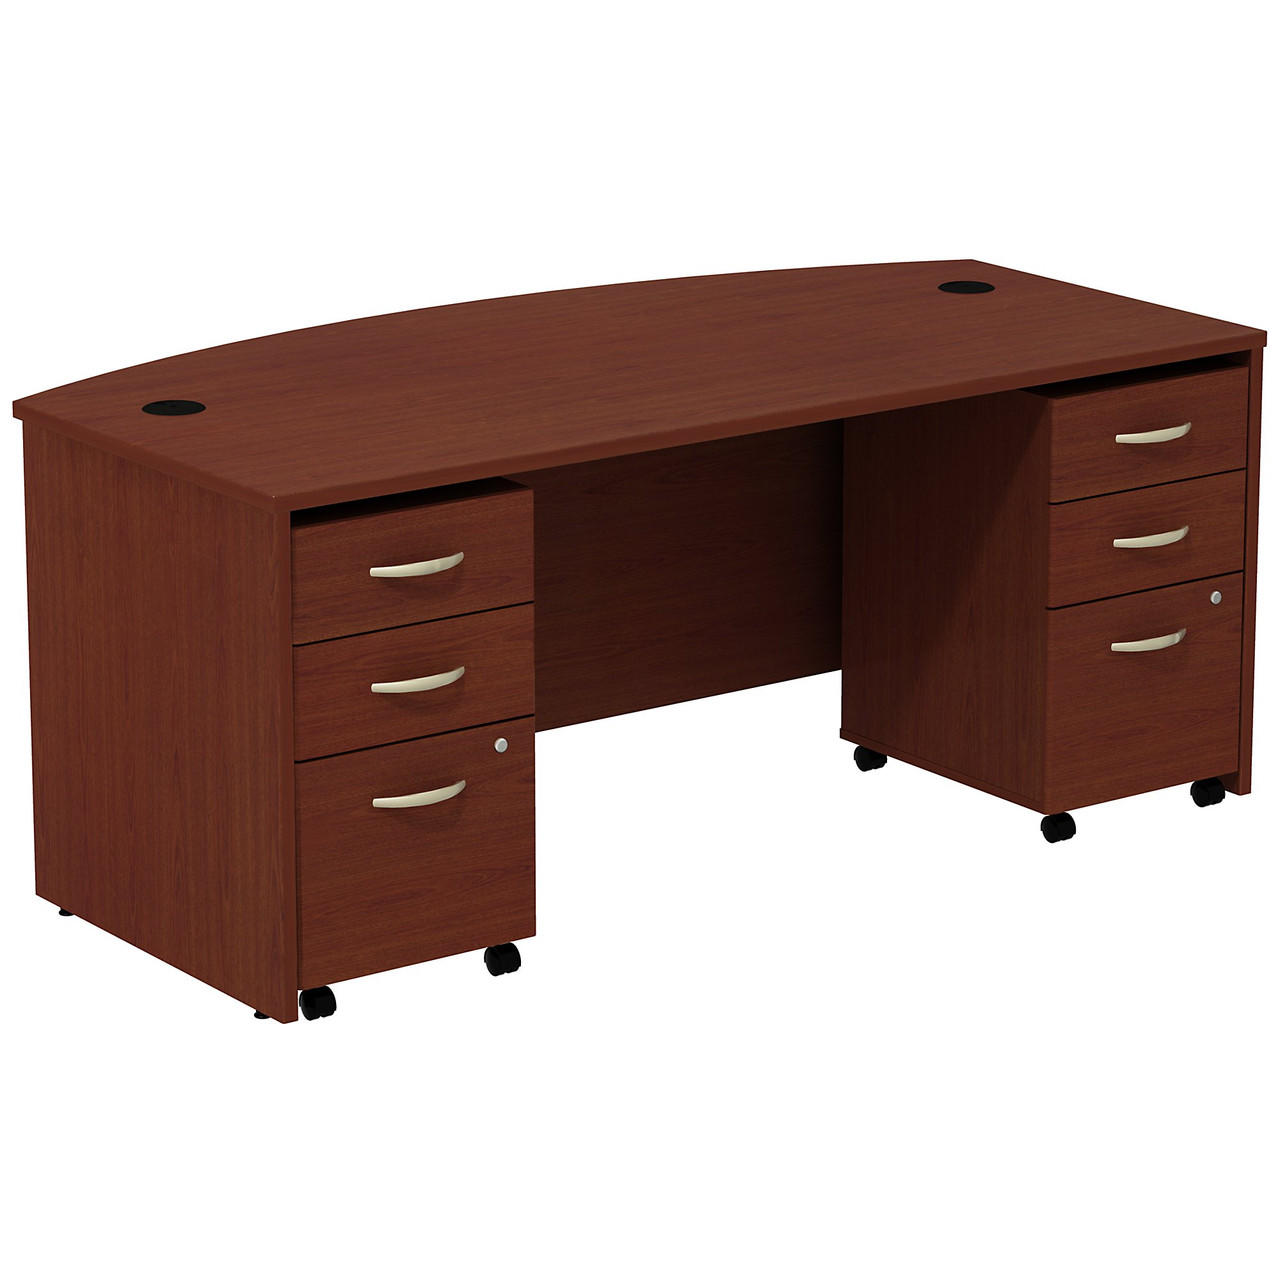  Bush Business Furniture Series C Bow Front Desk with 3 Drawer Mobile Pedestals 